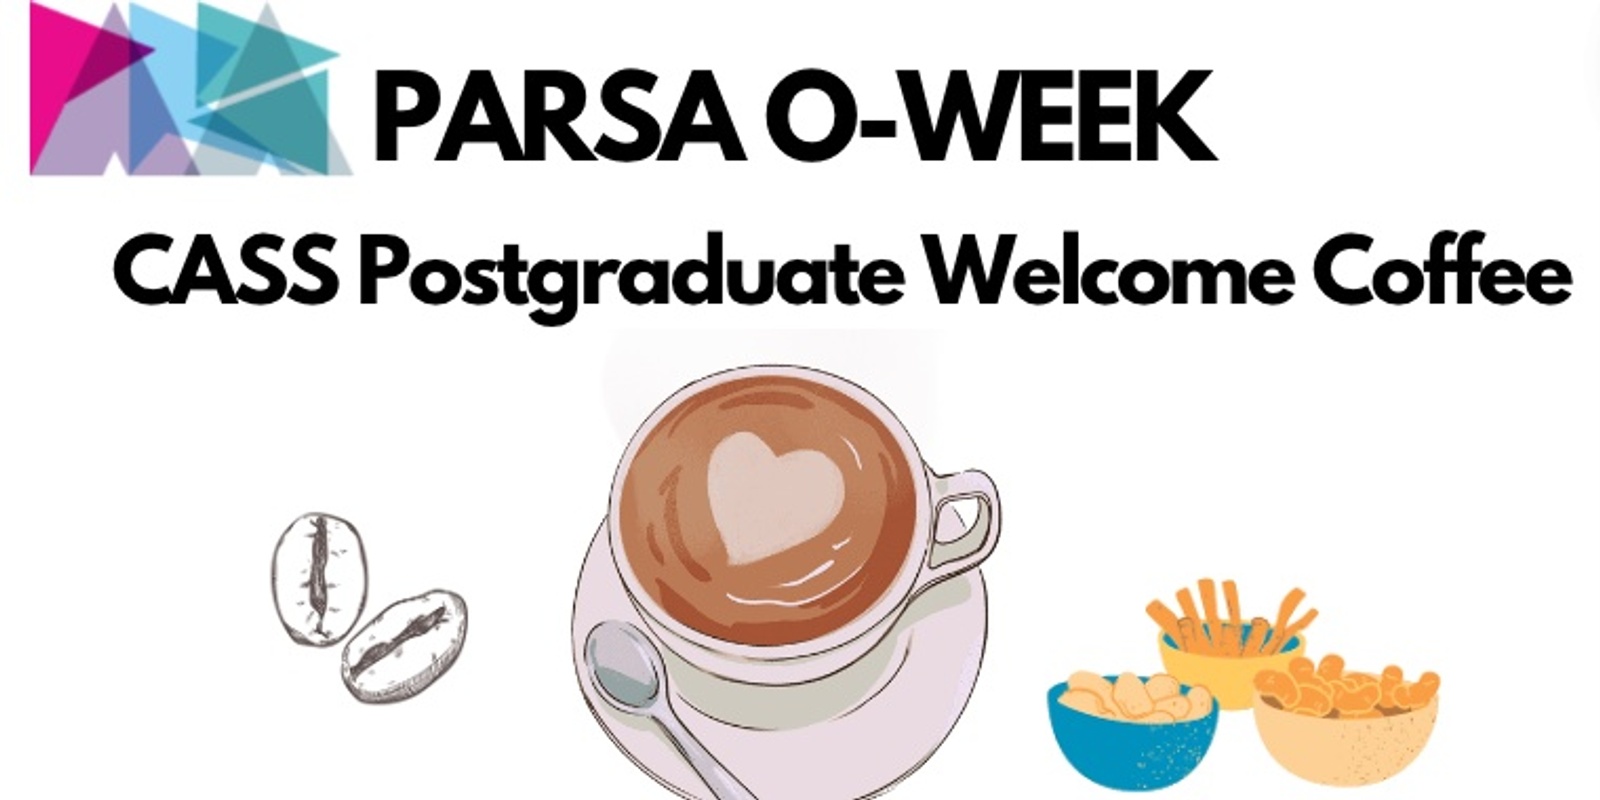 Banner image for PARSA O-WEEK CASS Postgraduate Welcome Coffee